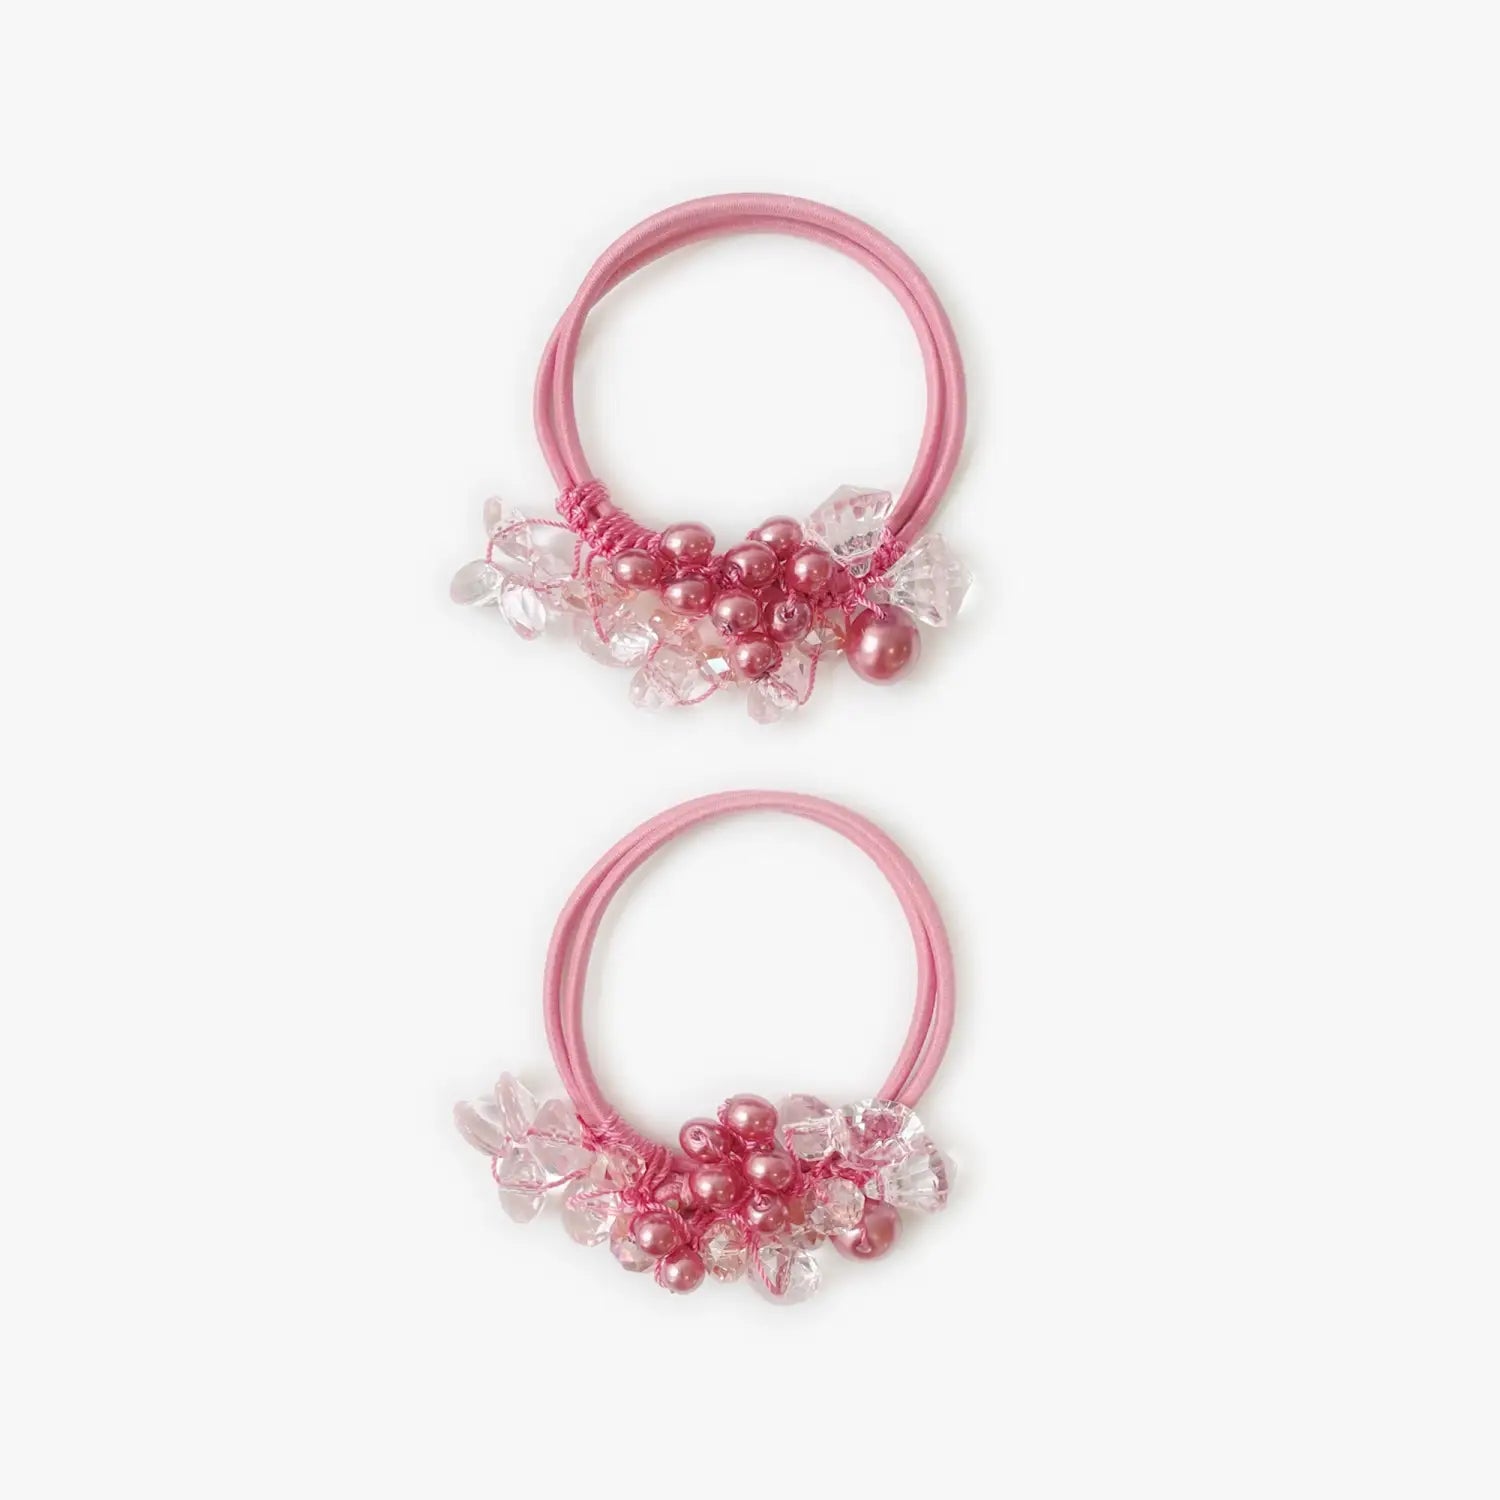 Pink and clear beaded hair band for kids - Beaded hair elastics pack of 2